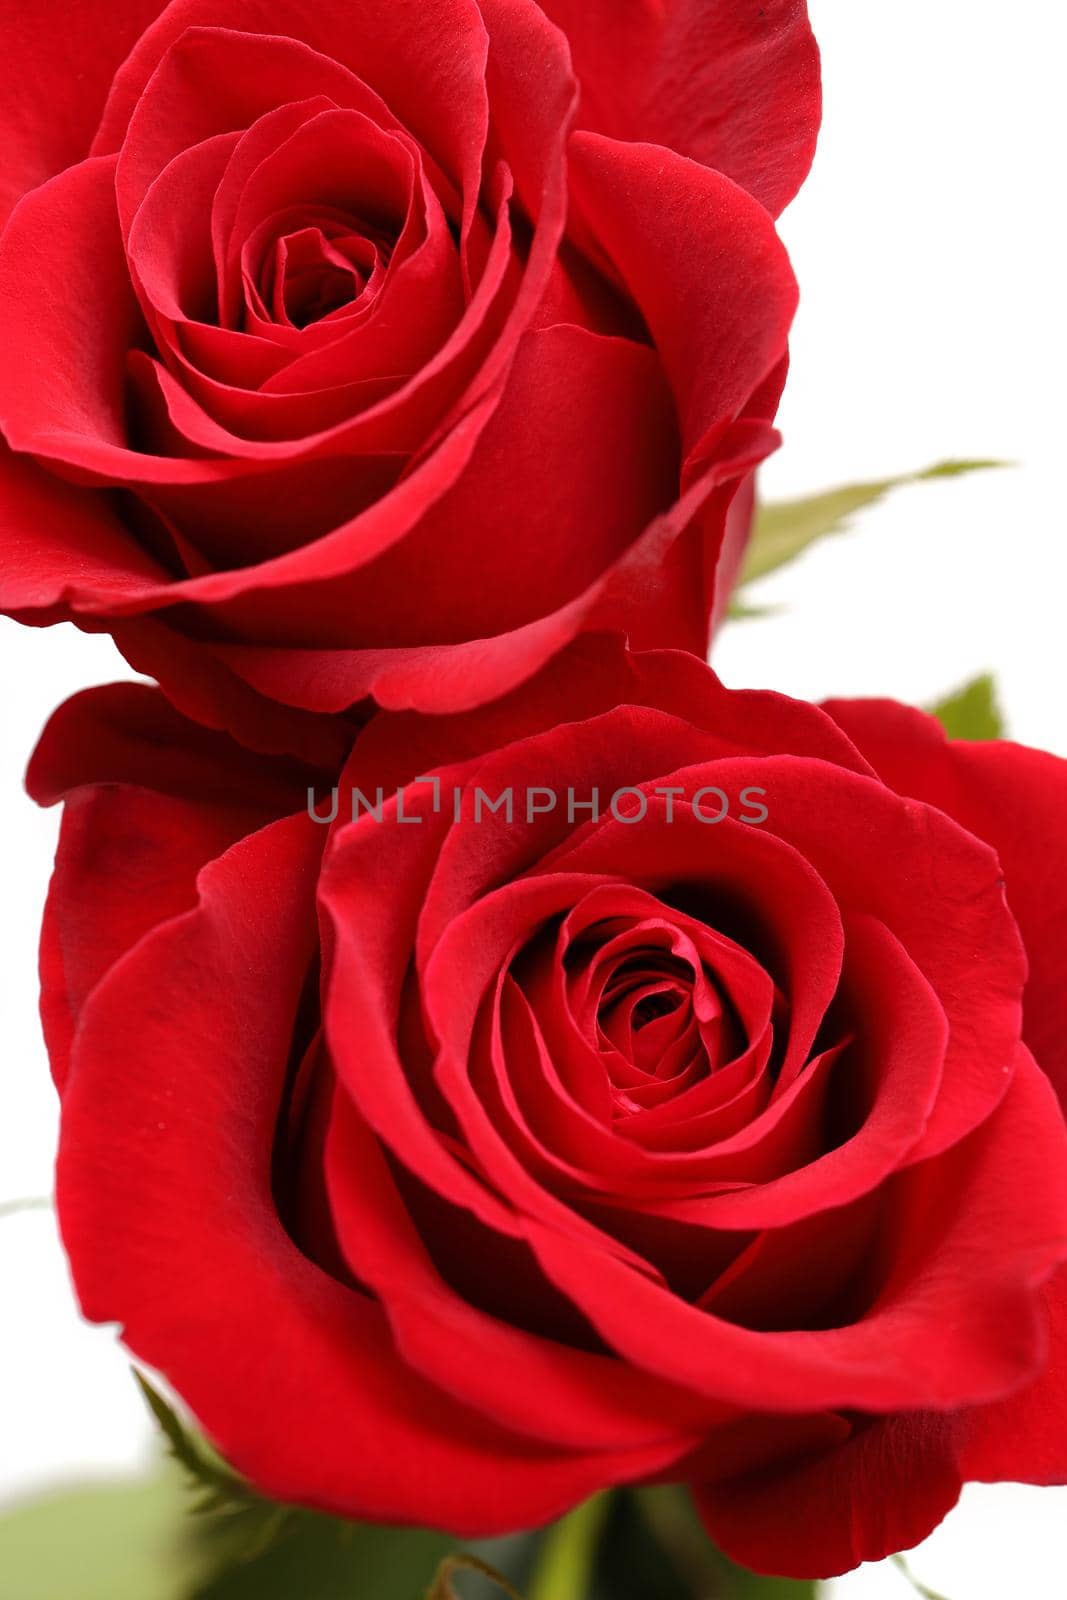 Directly Above Close up of Two Red Roses by markvandam